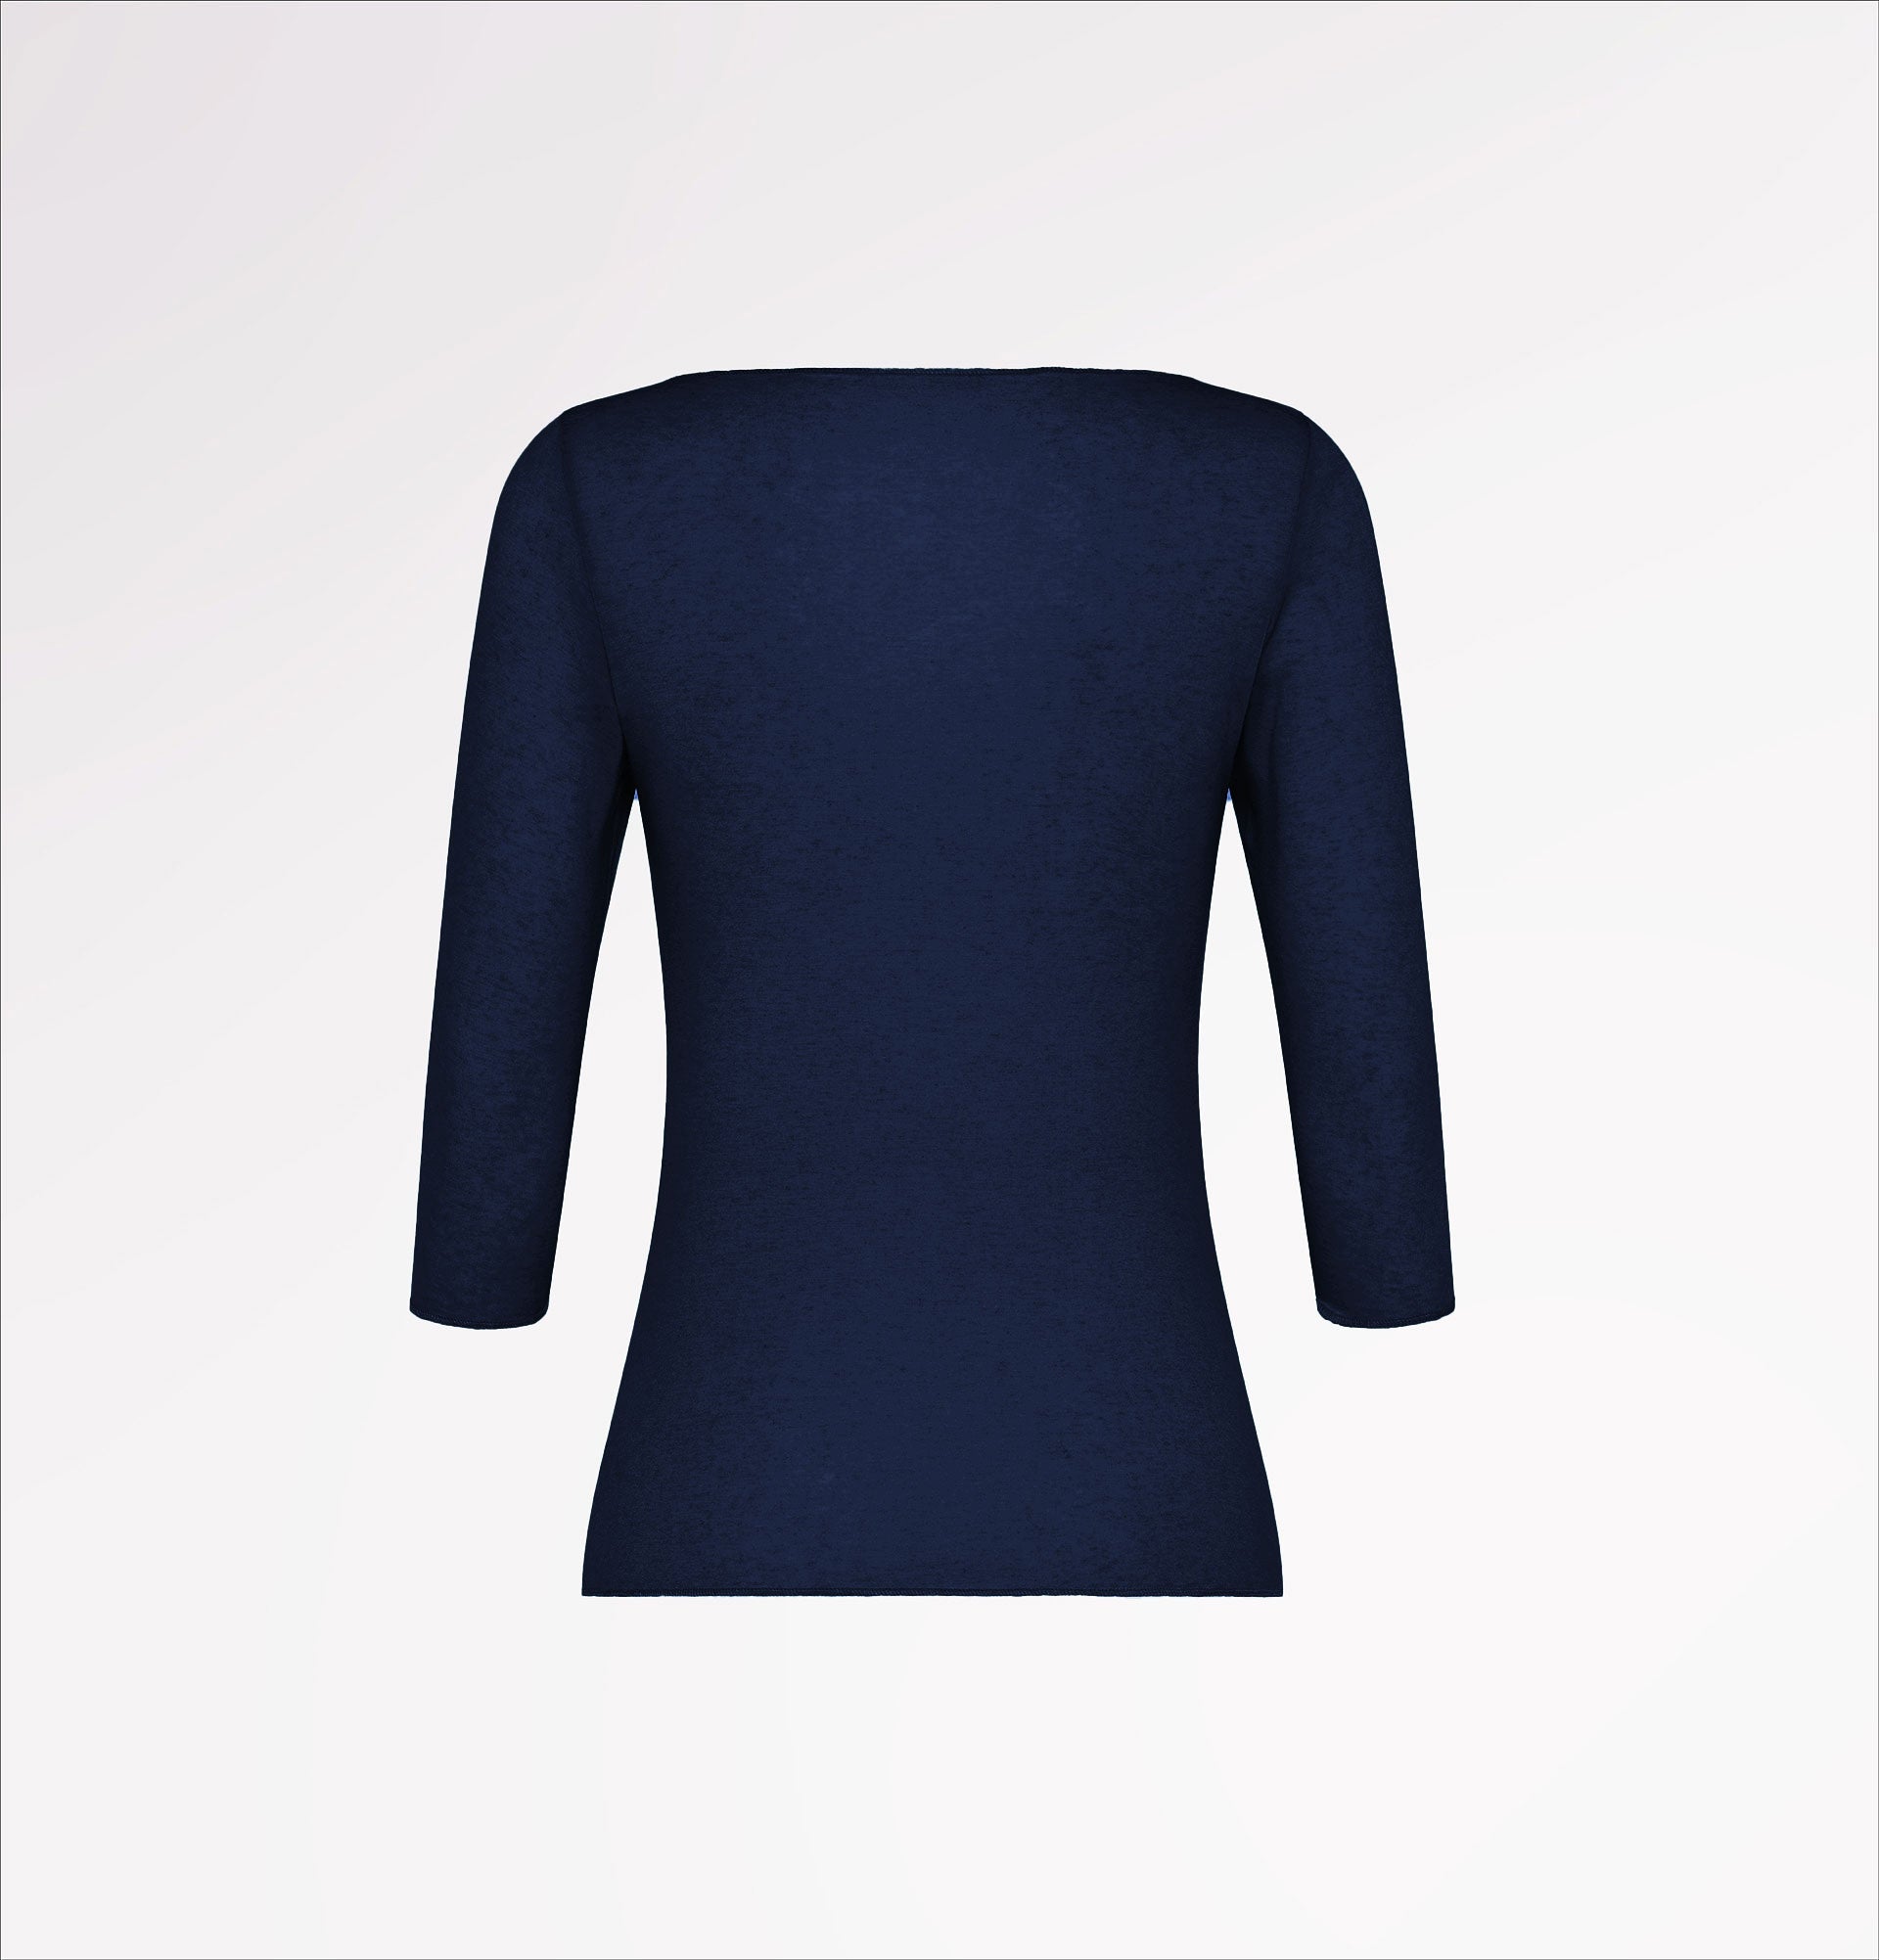 Boat-neck sweater in TENCEL™ cashmere with three-quarter sleeves